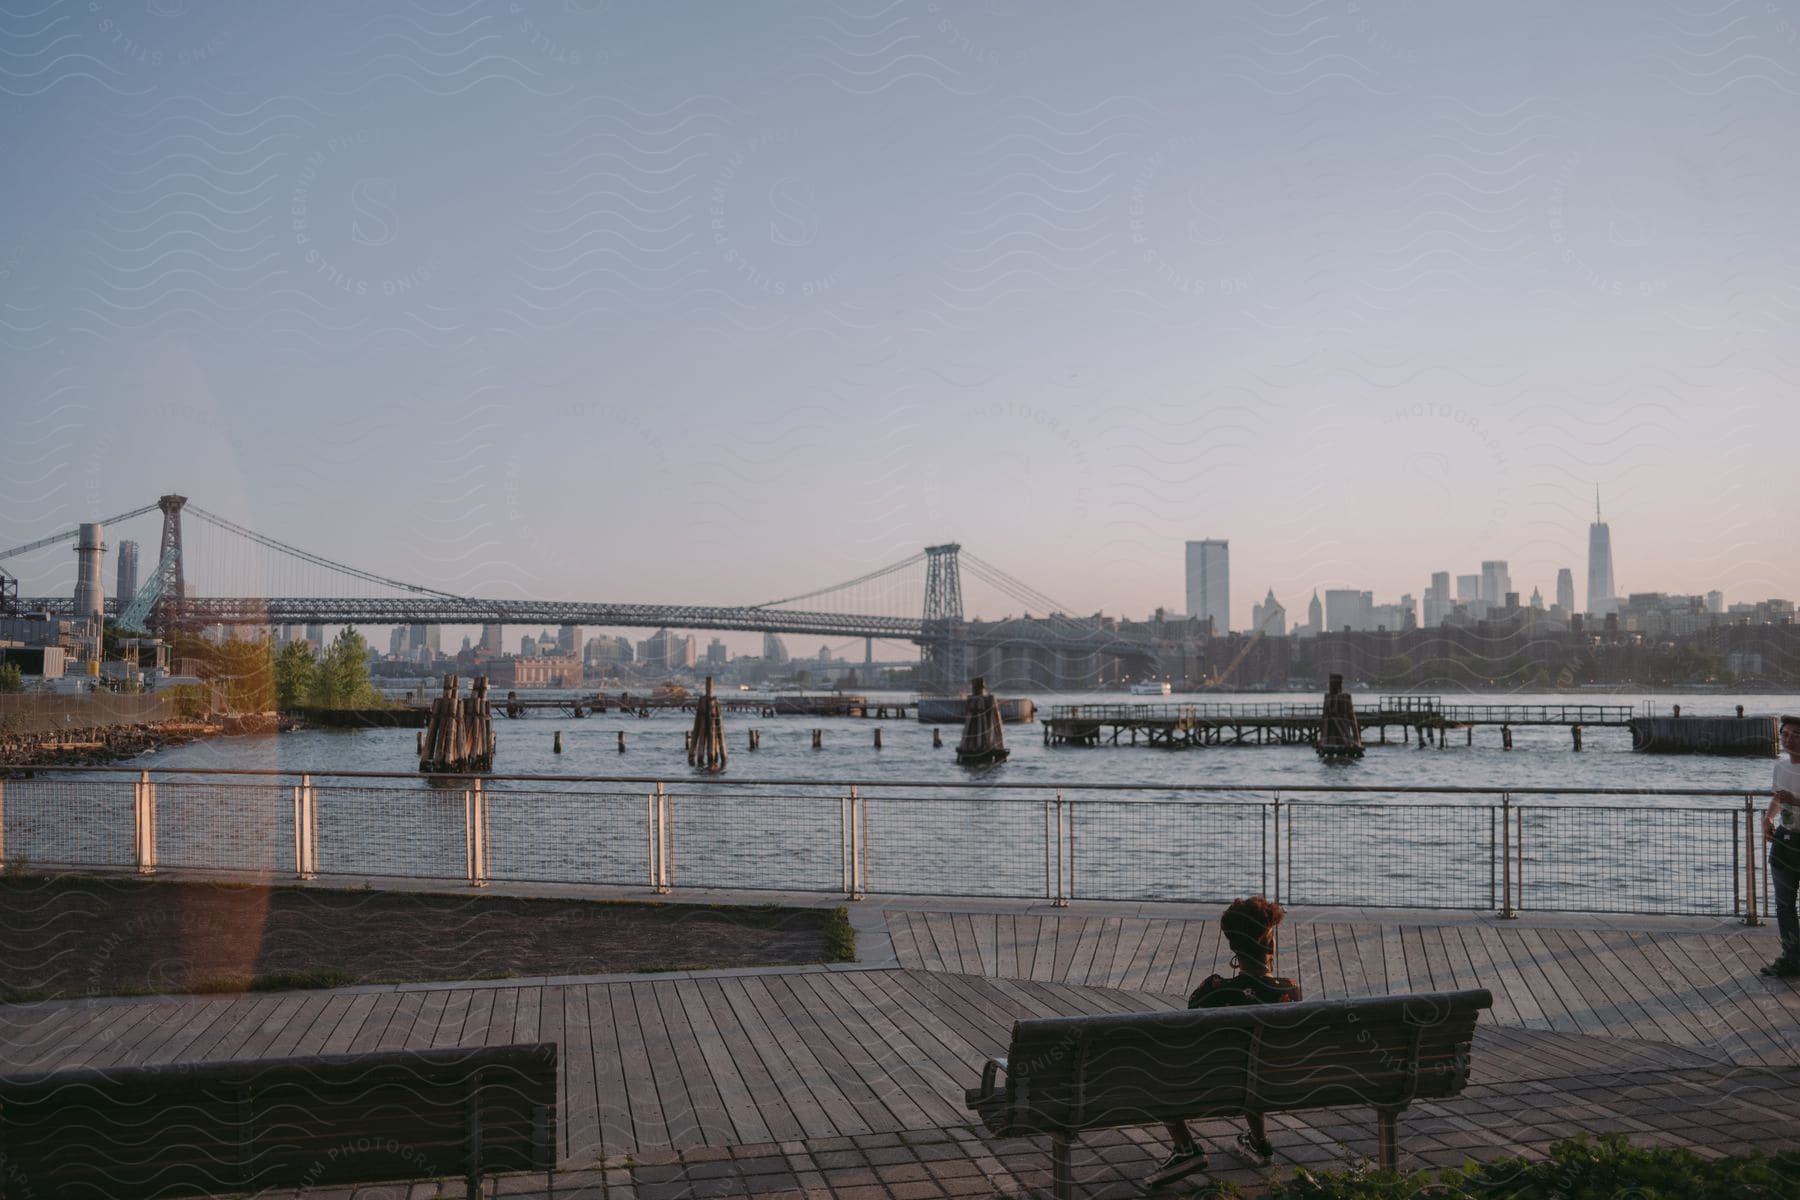 A woman on a bench at the pier looking out at boats and a long bridge connecting to the city in the horizon at dawn